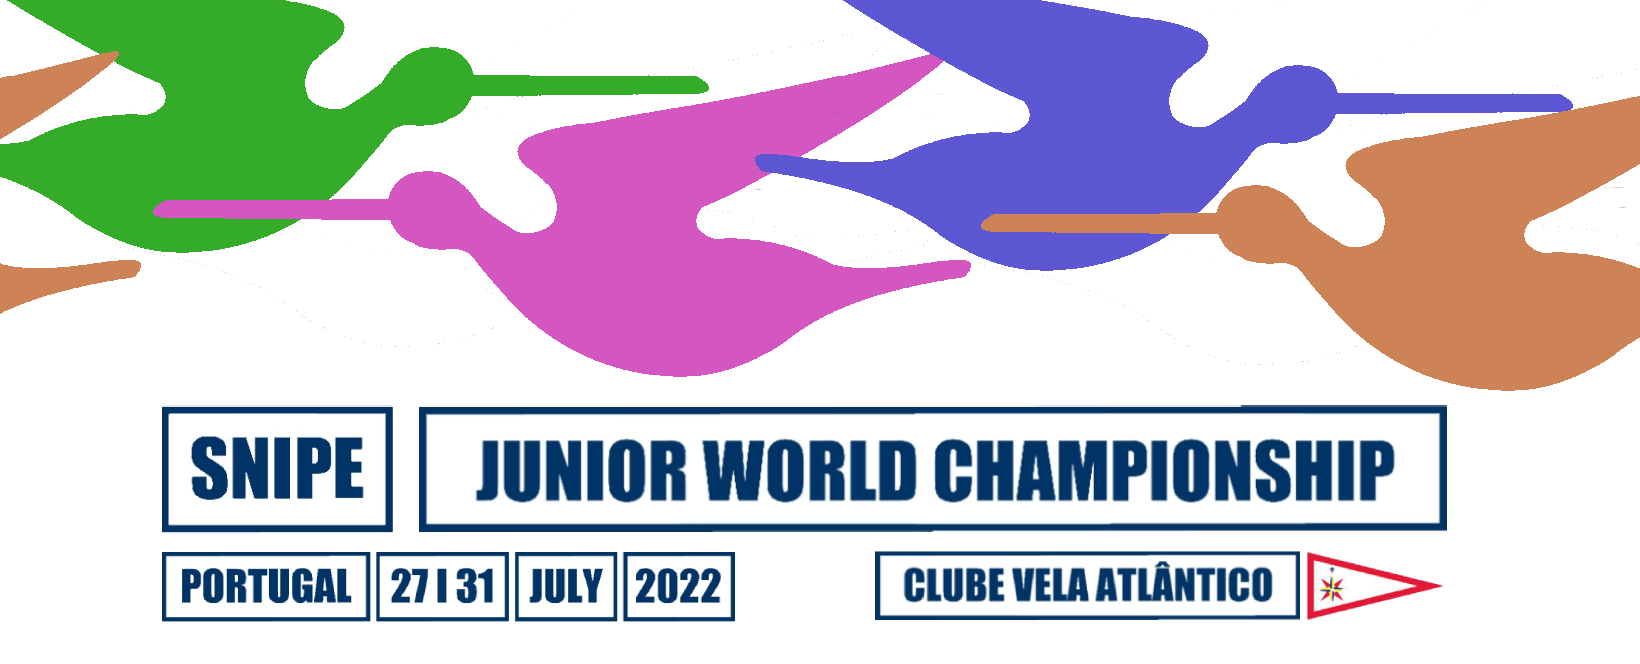 Who is coming to sail the Snipe Junior World Championship? Image